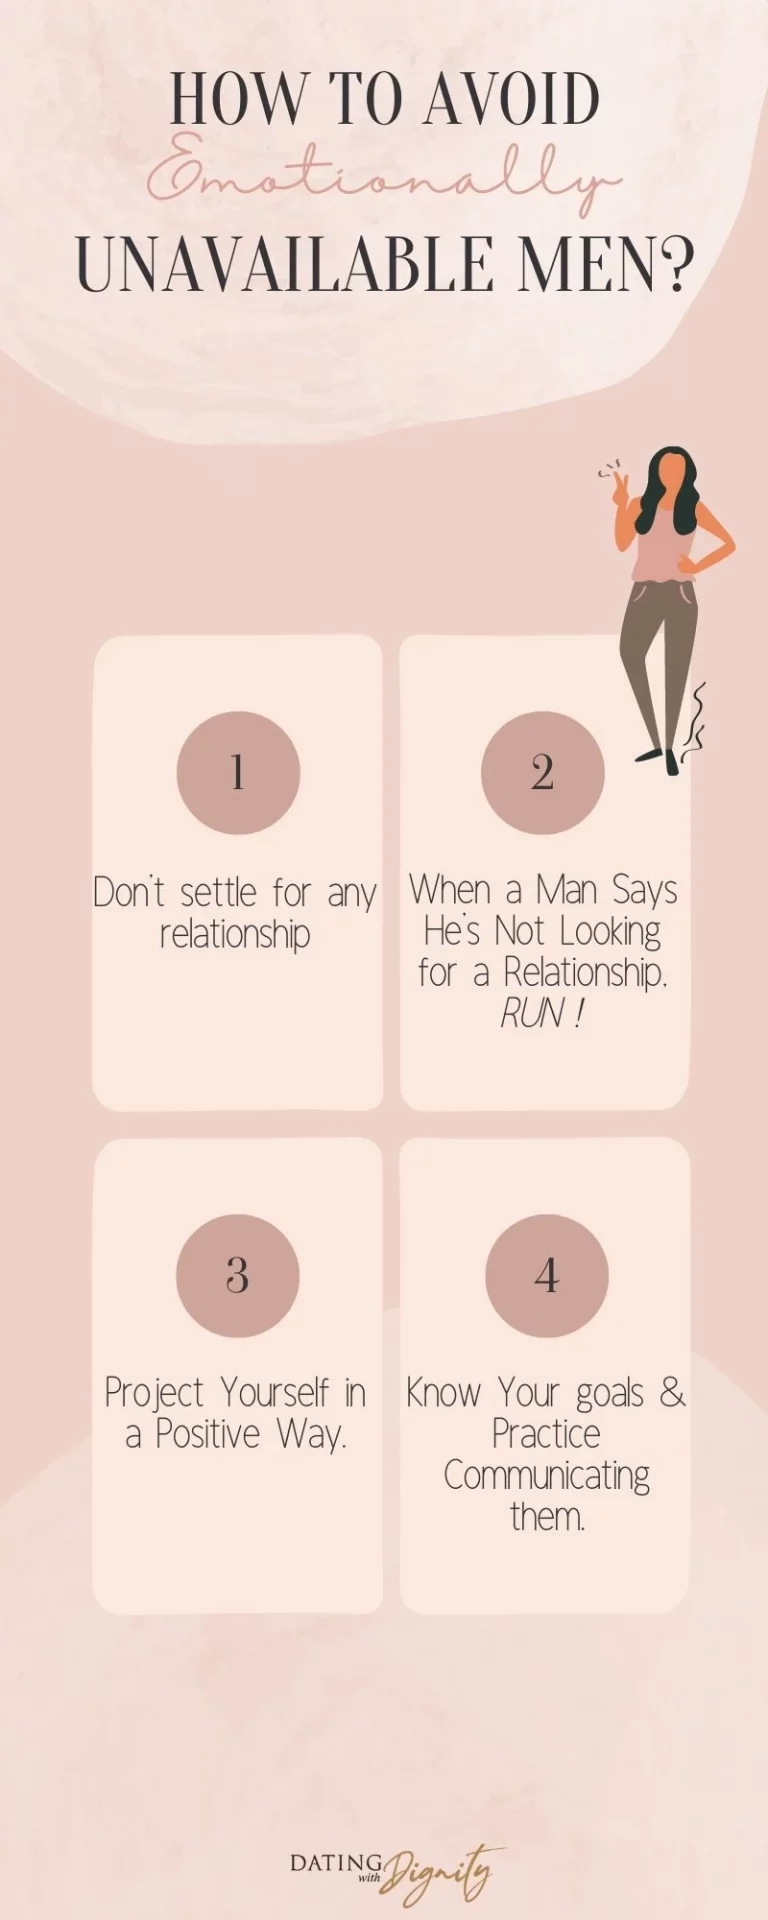 How to avoid emotionally unavailable men